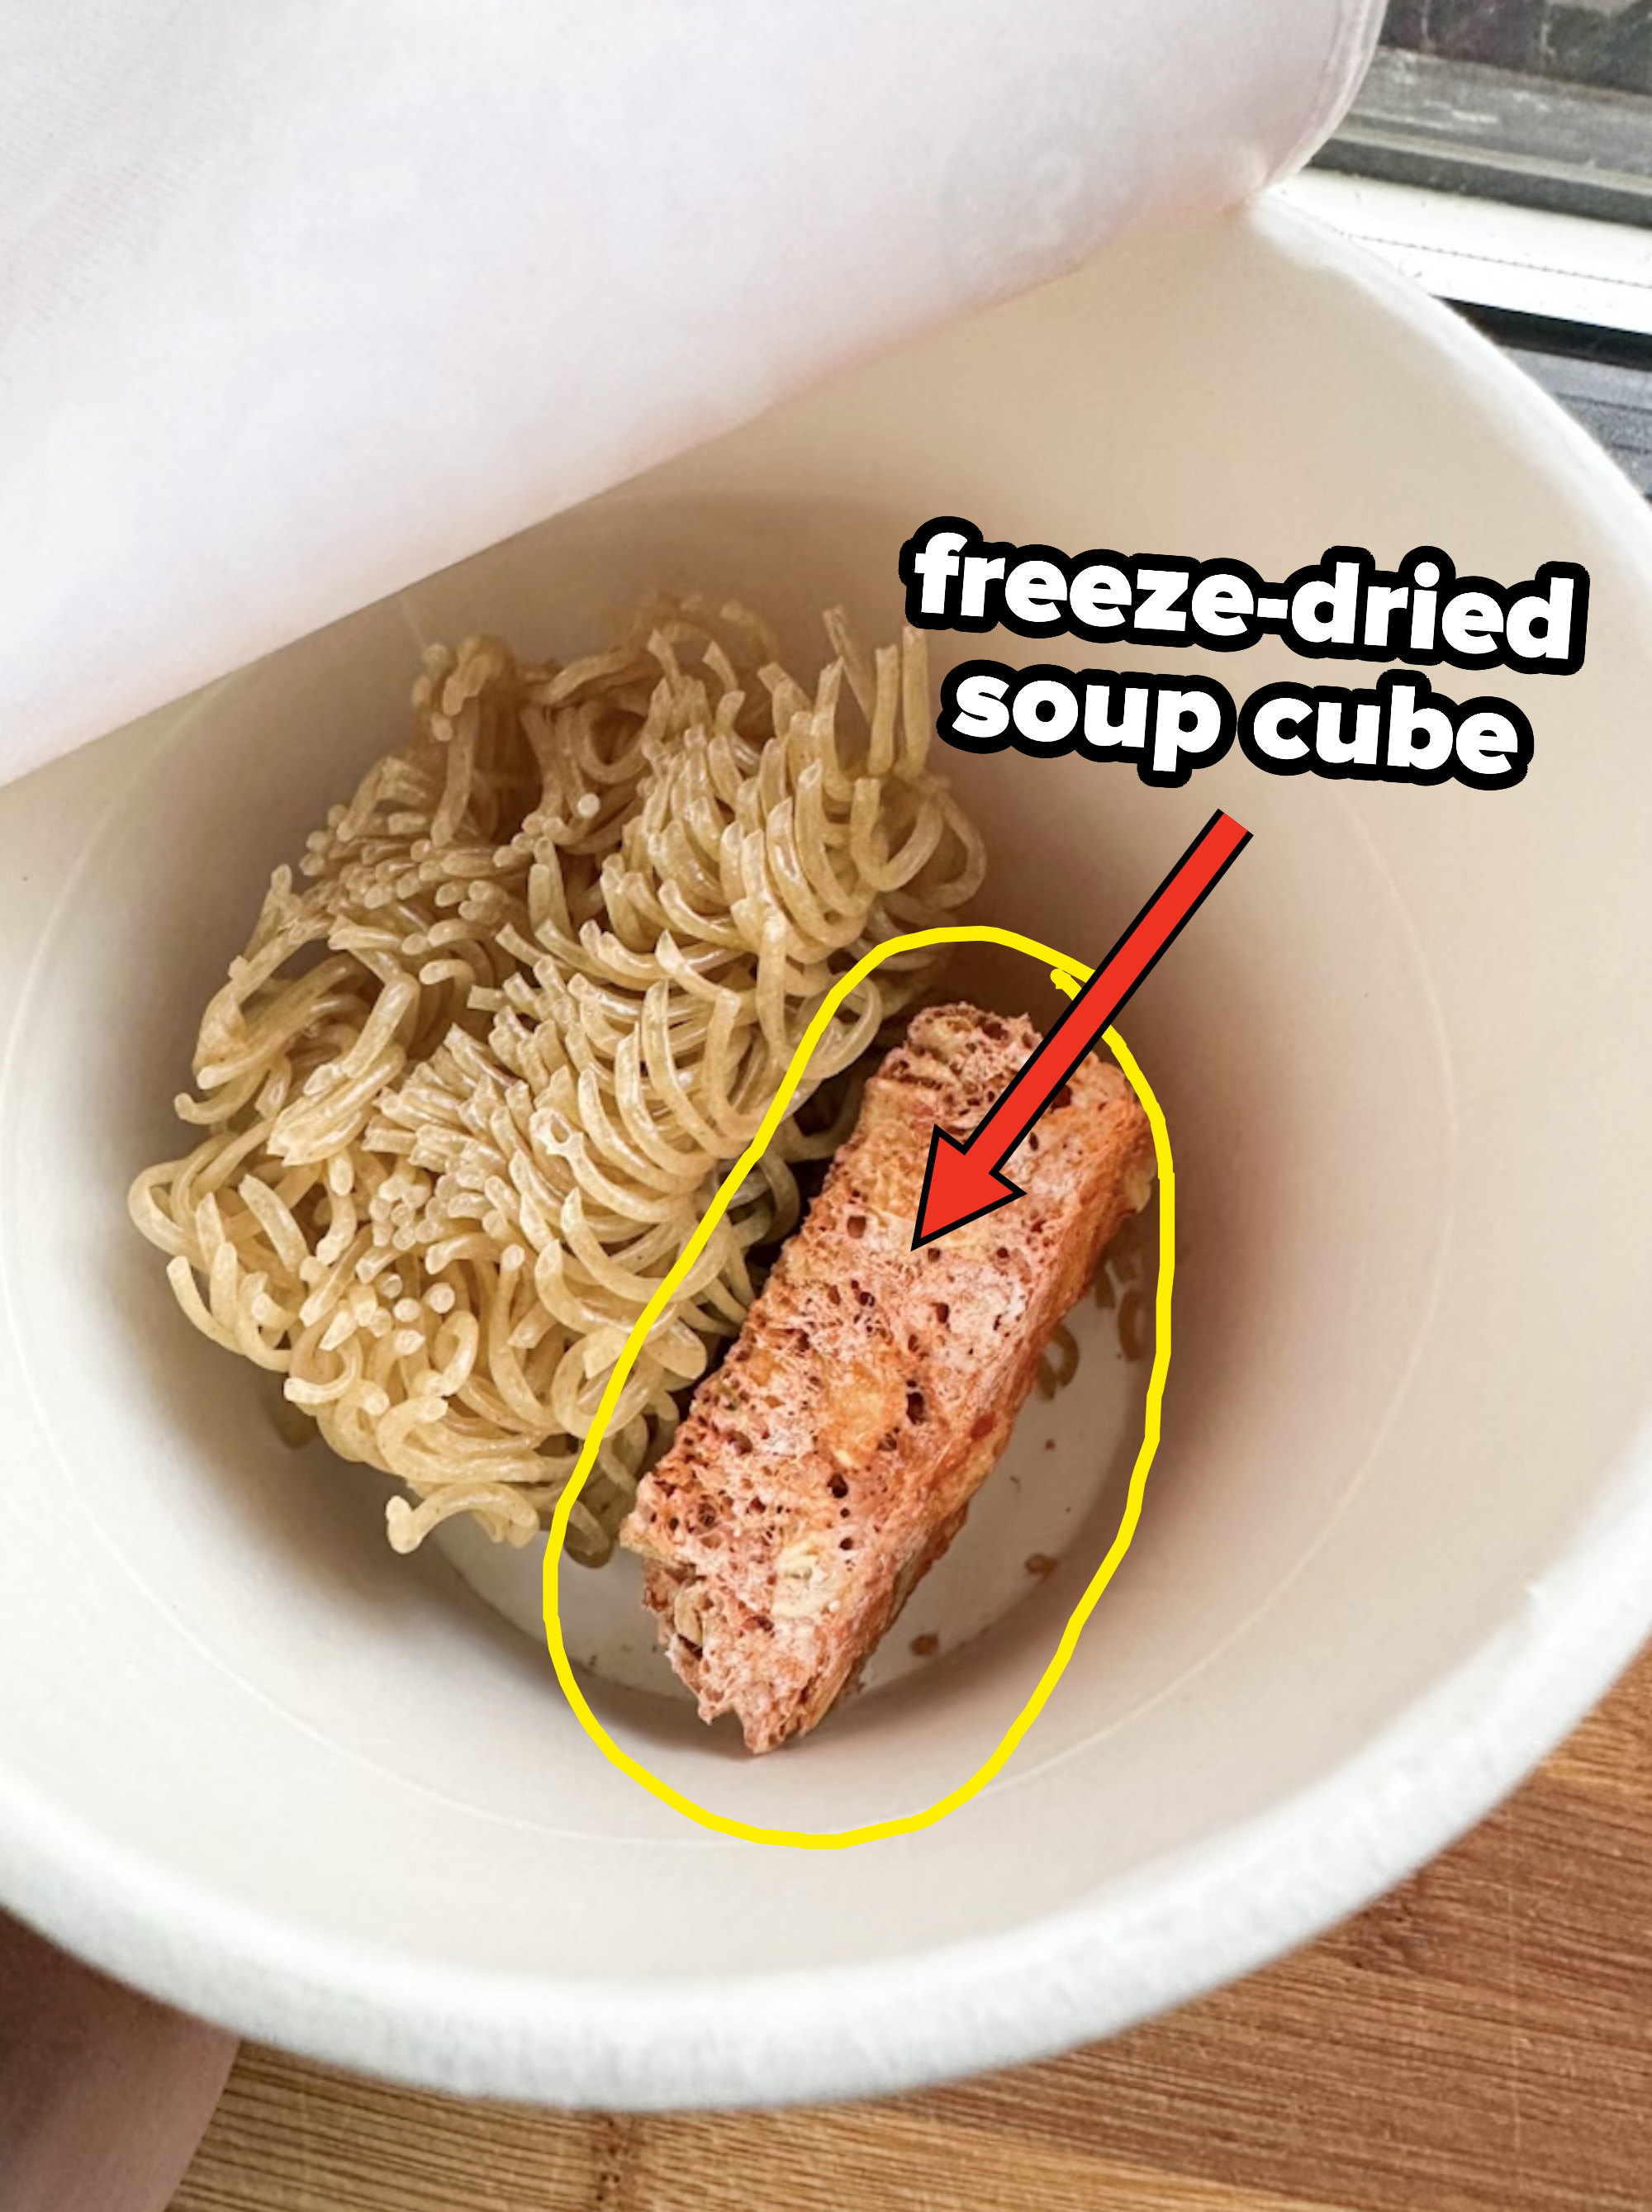 arrow pointing to freeze dried soup cube in the cardboard cup